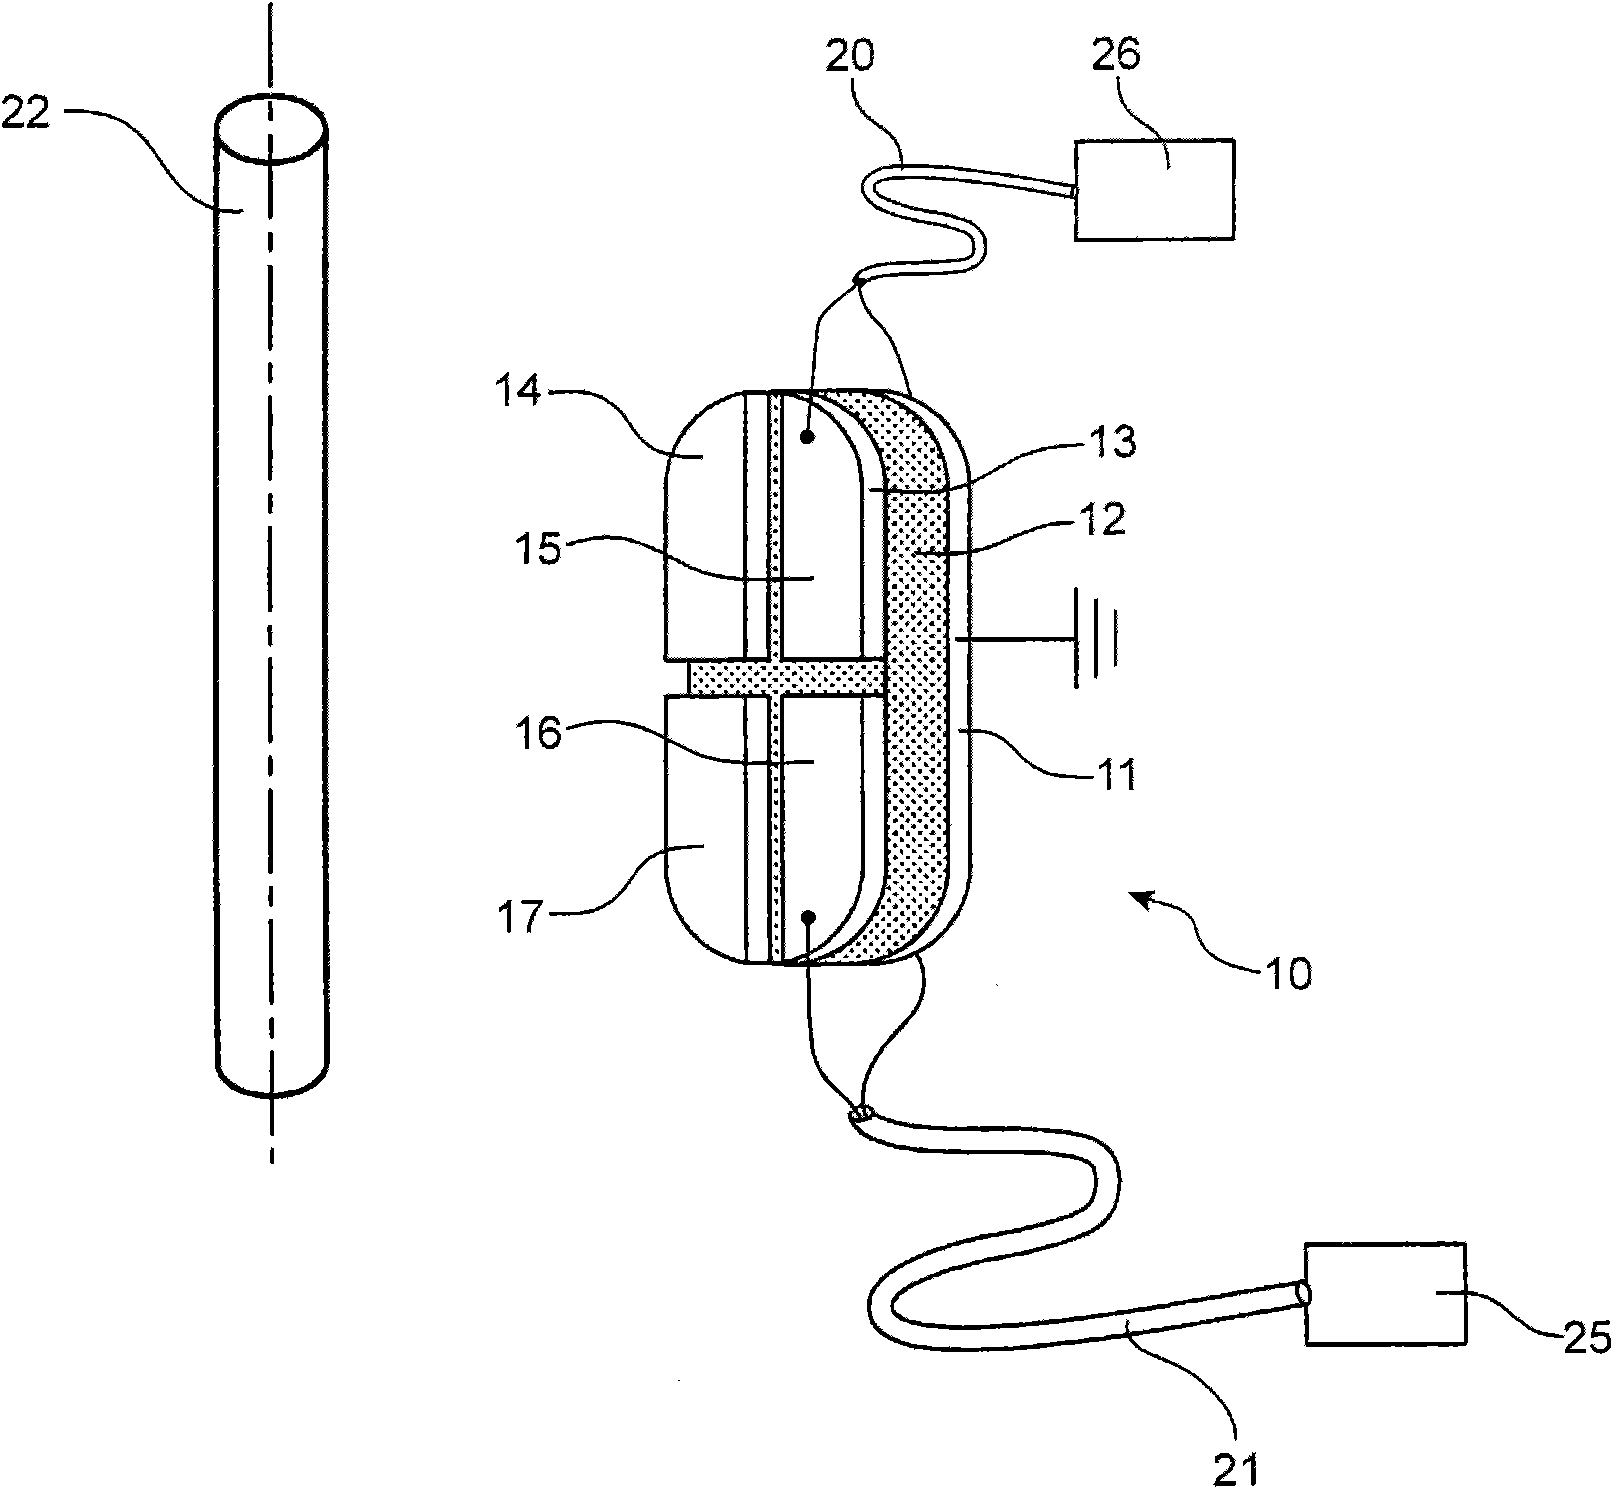 Capacitance apparatus and system for measuring high voltage element voltage and gas insulated transformer substation